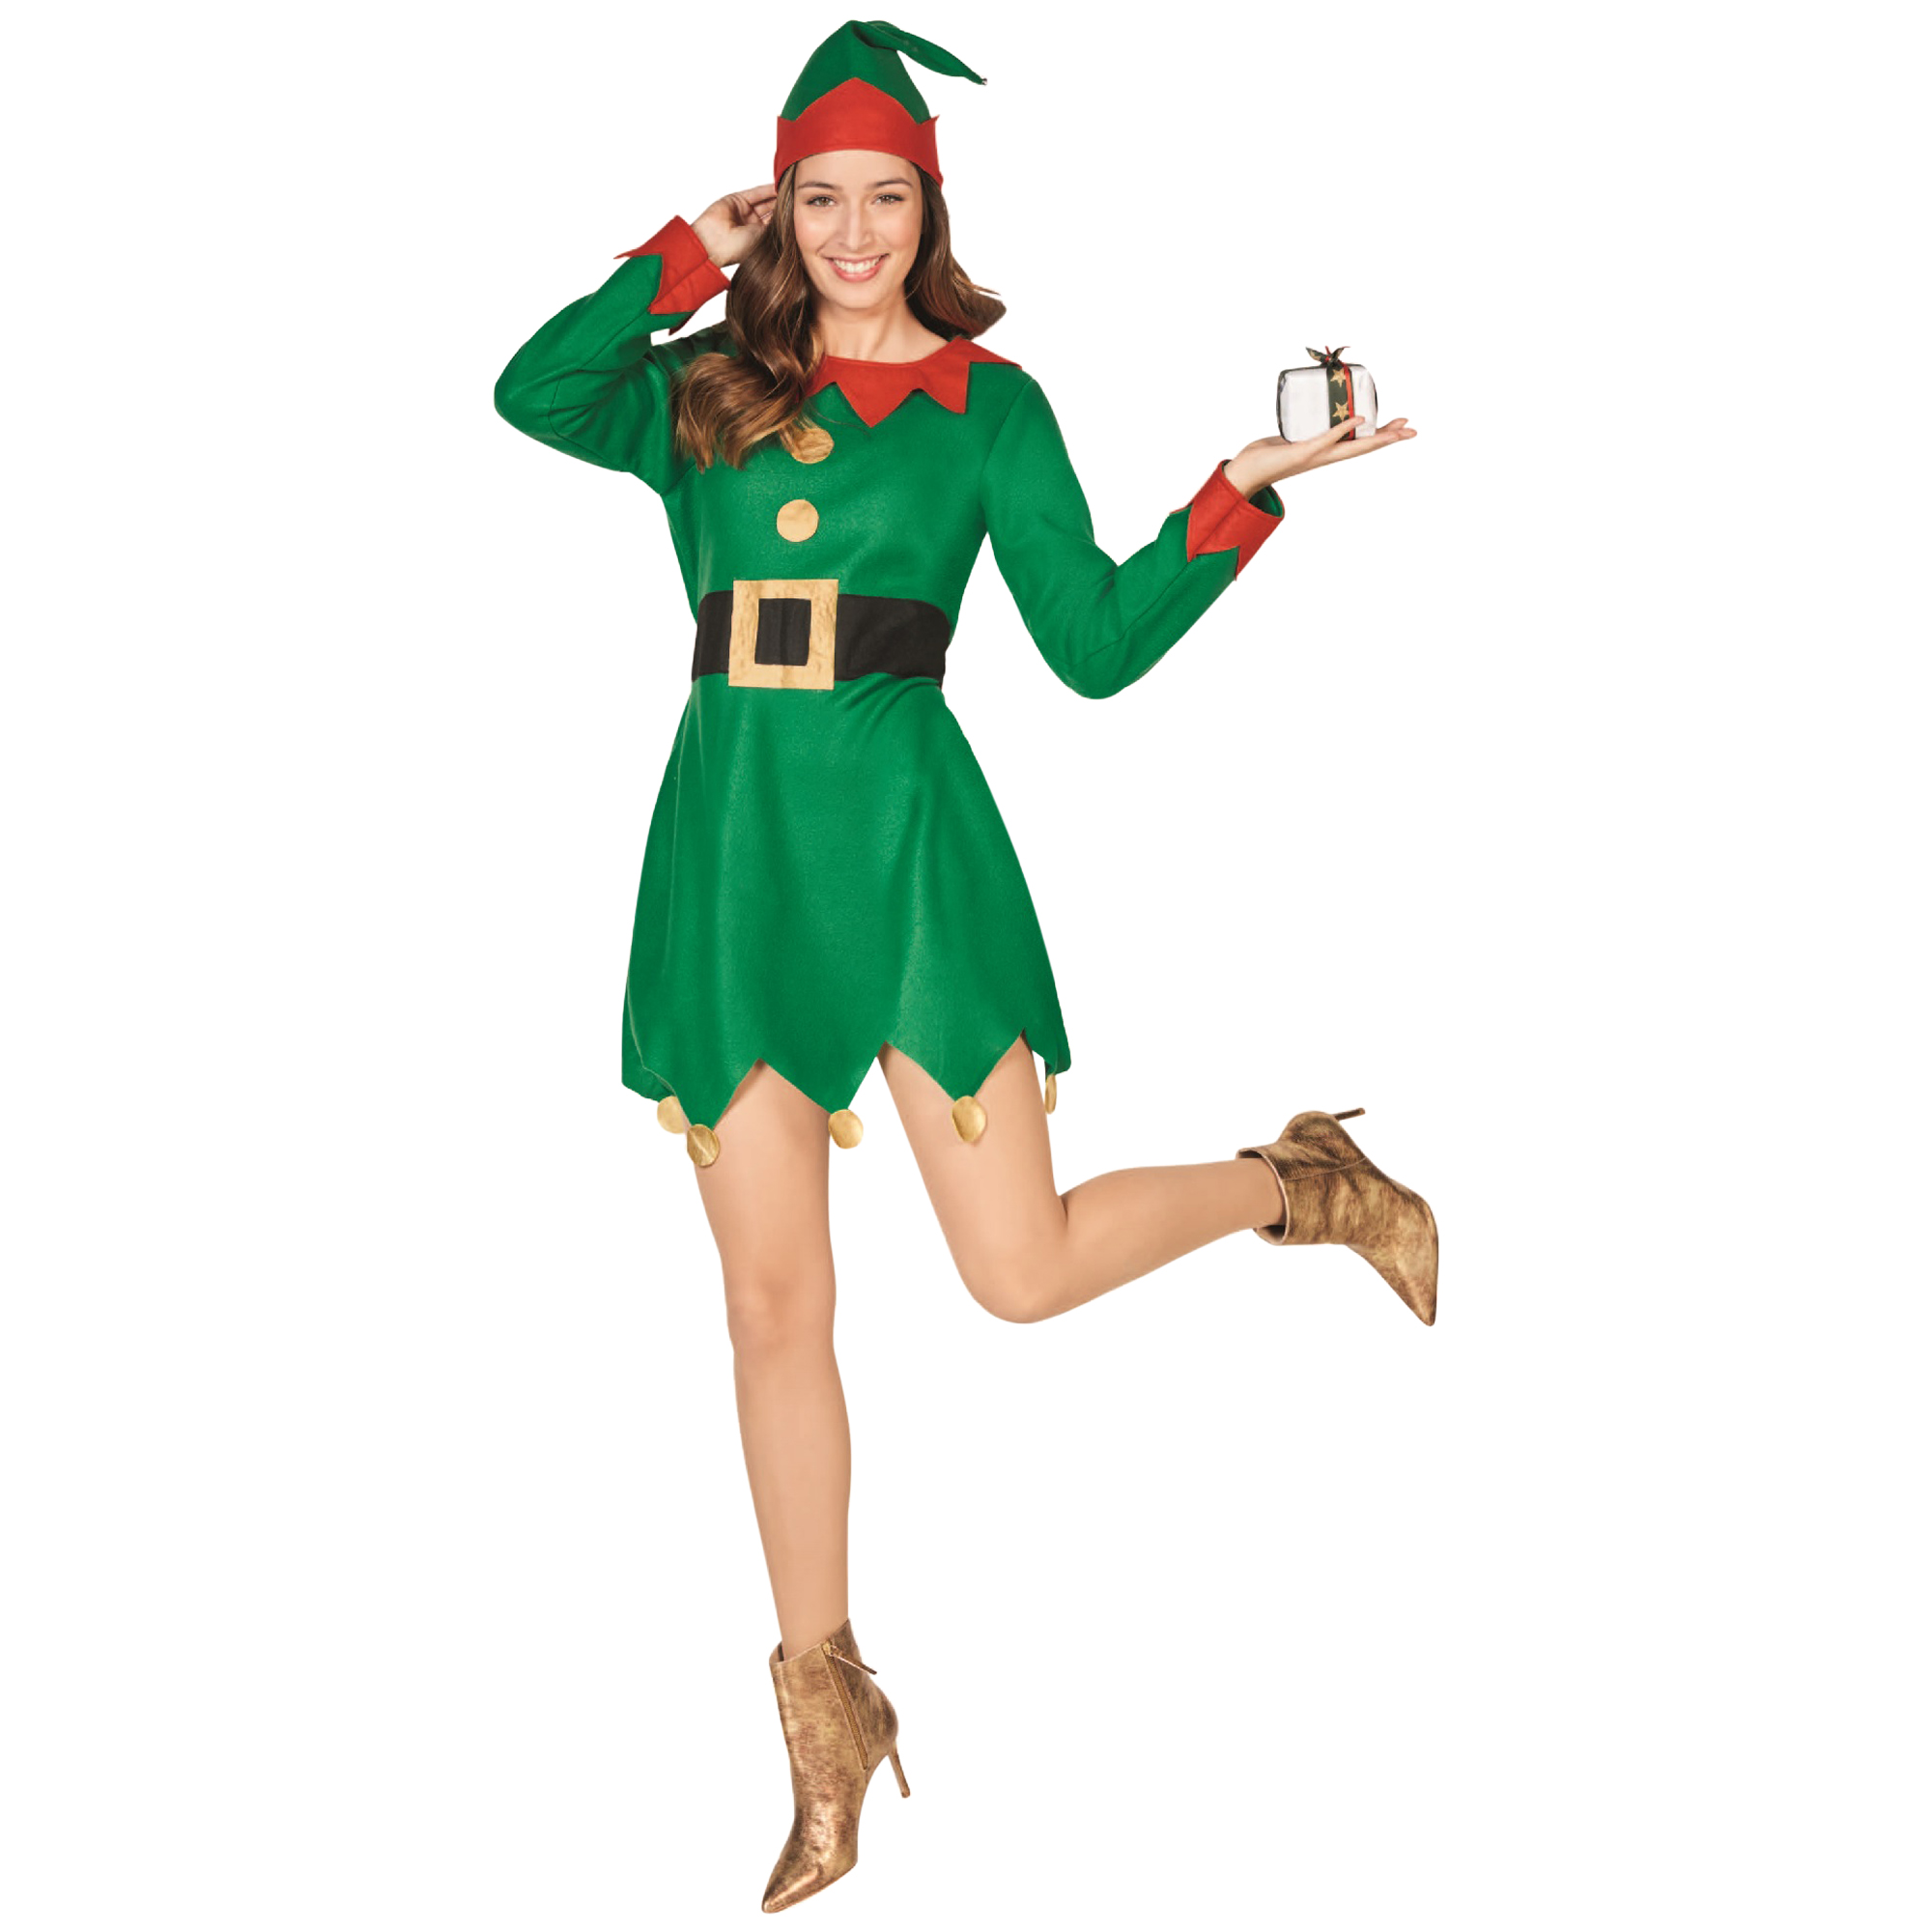 Northlight Women's Red and Green 2-Piece Elf Costume- Size XL - image 1 of 2